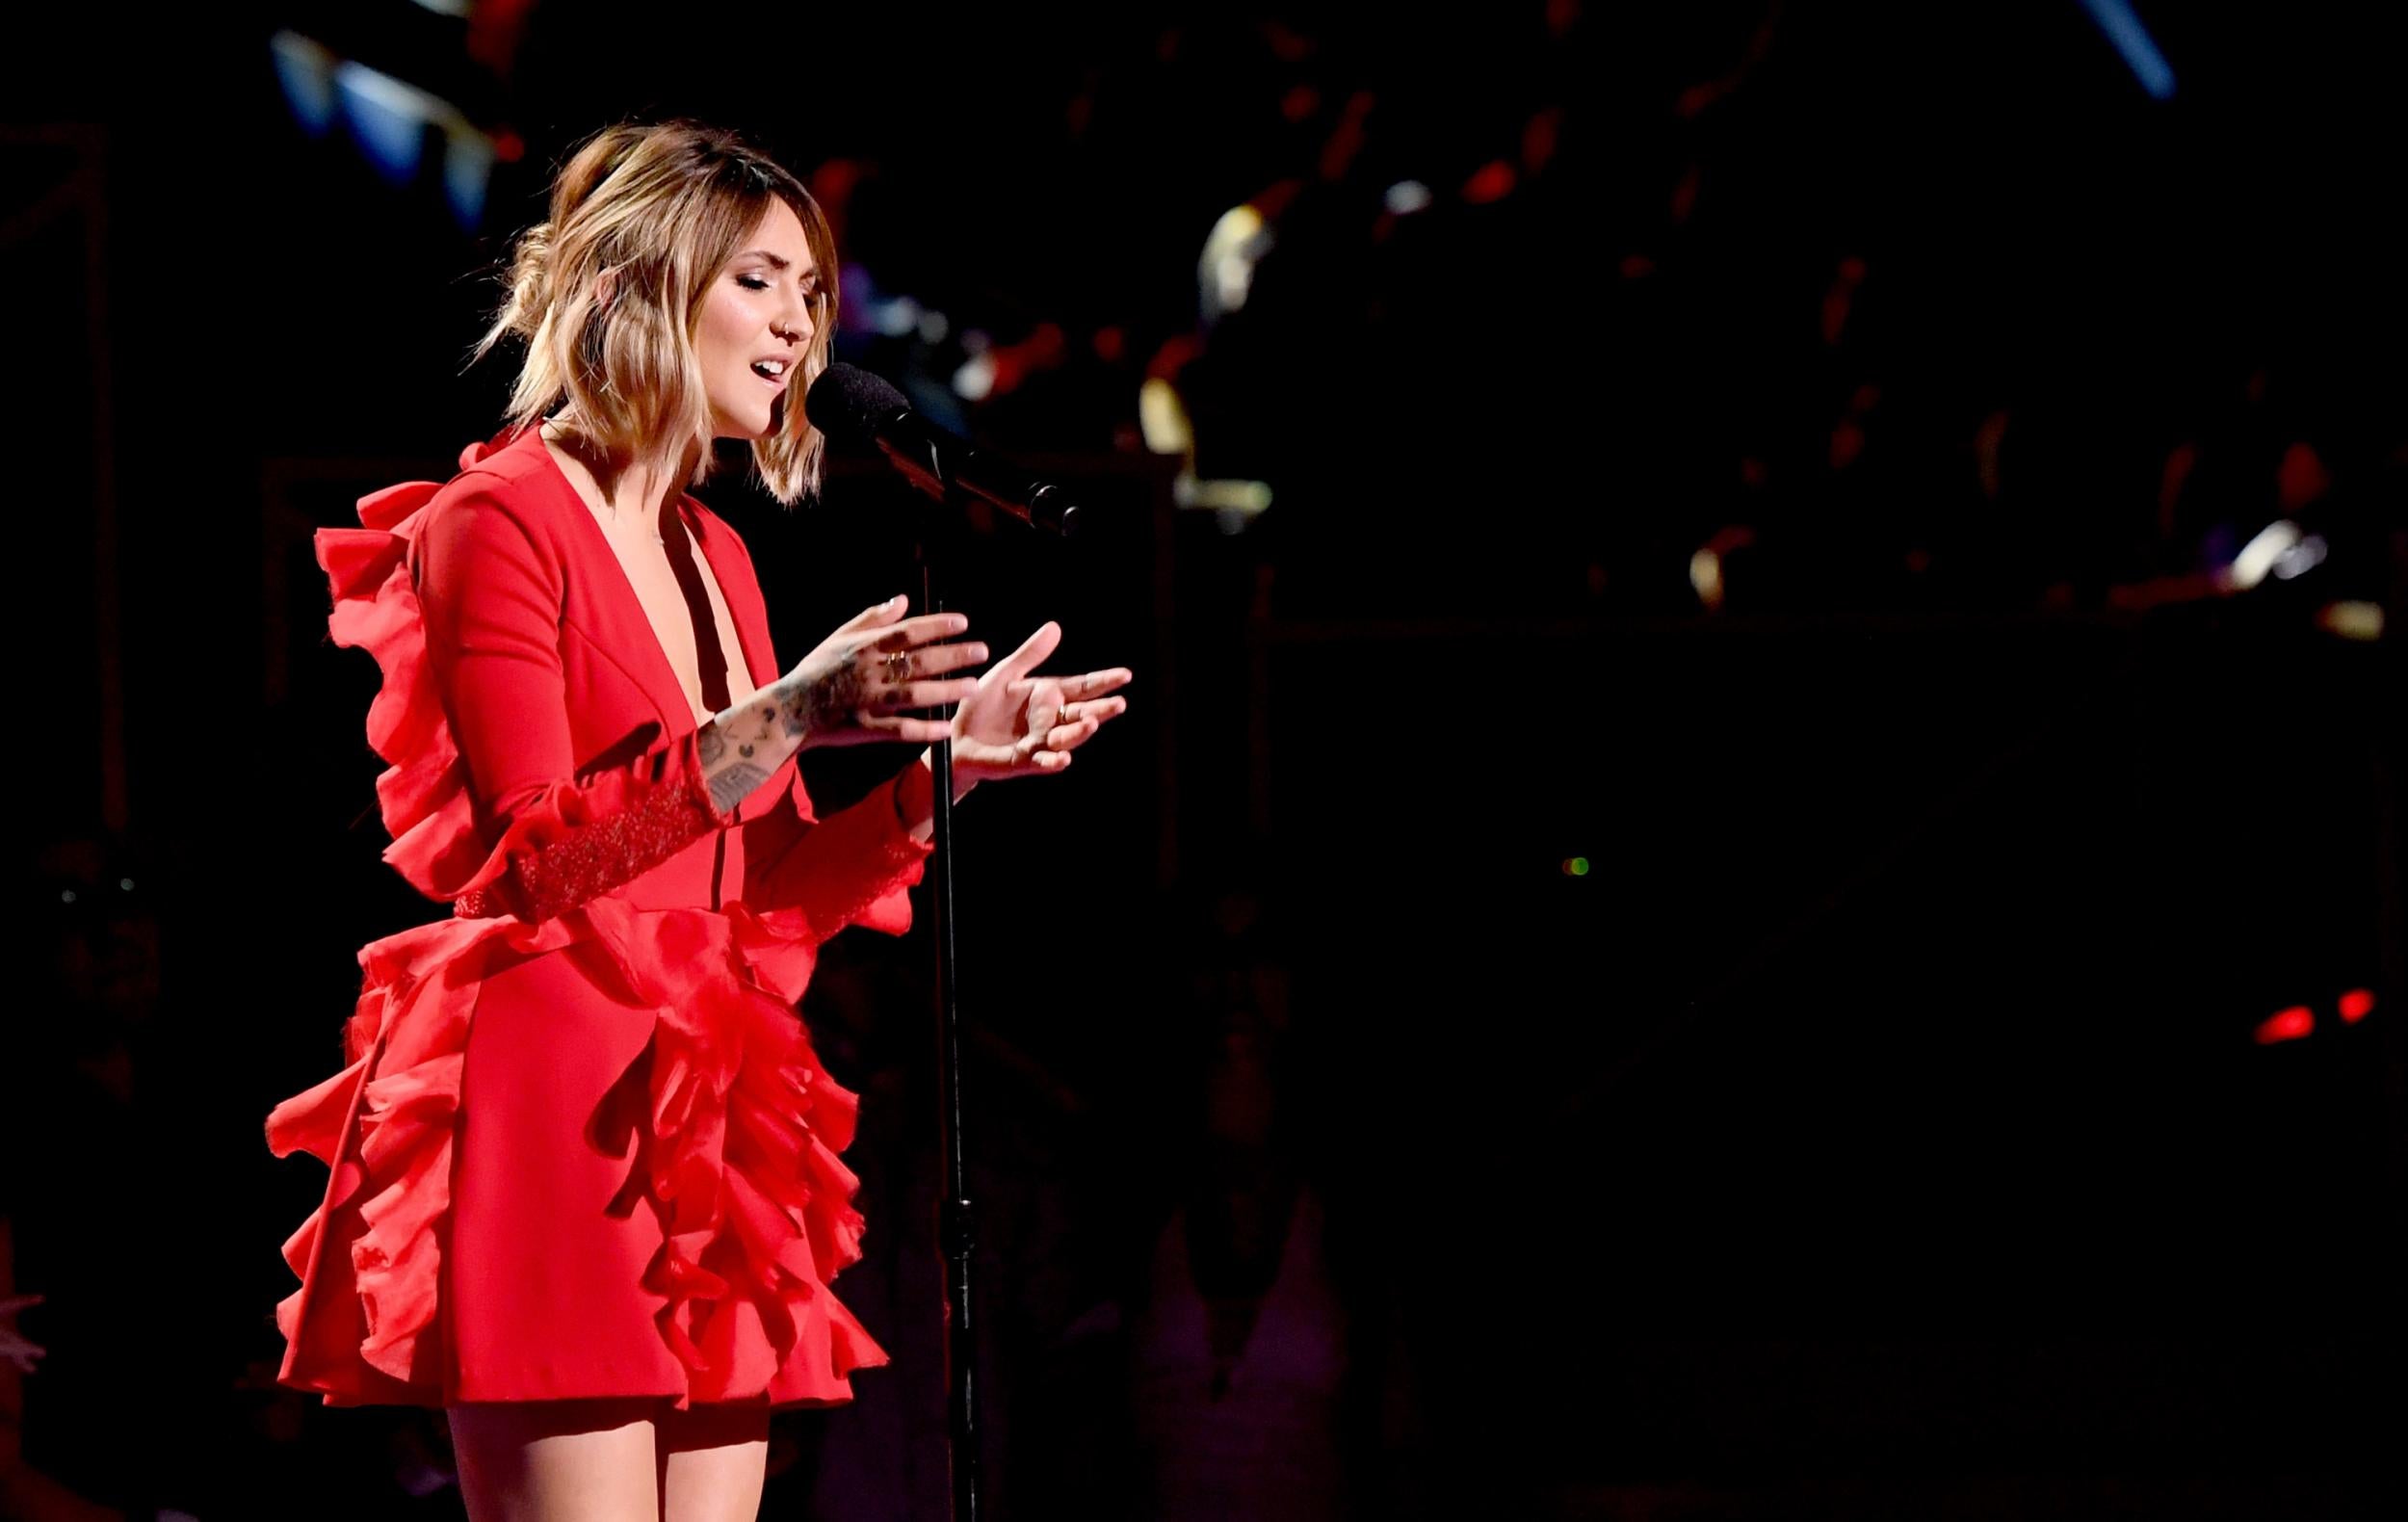 Julia Michaels performs at the 2017 MTV Video Music Awards